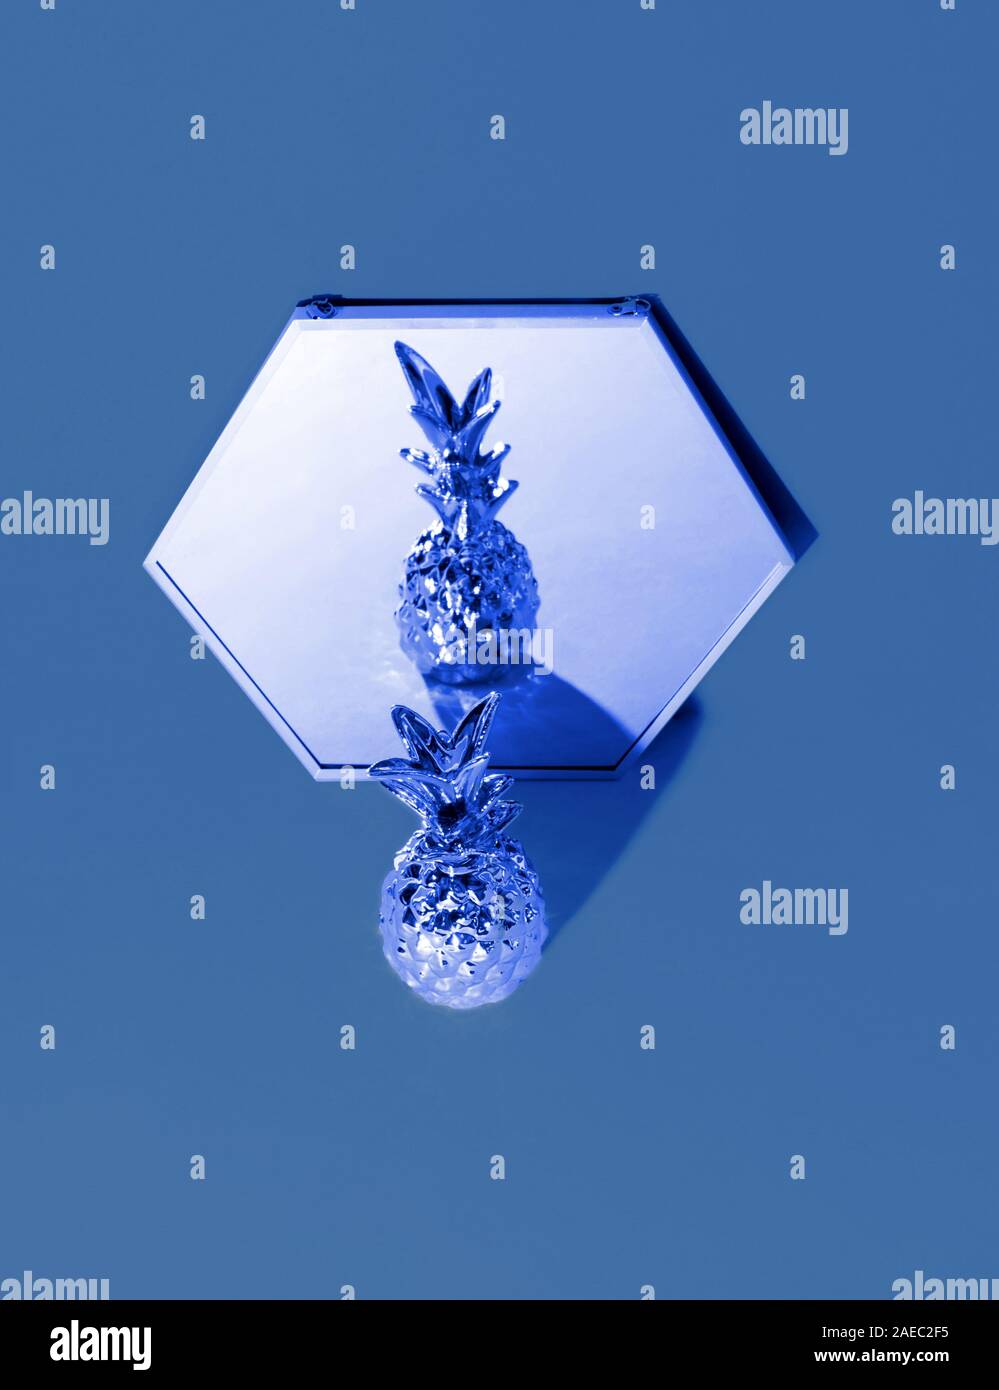 Tropical Pineapple on classic blue background. Stock Photo